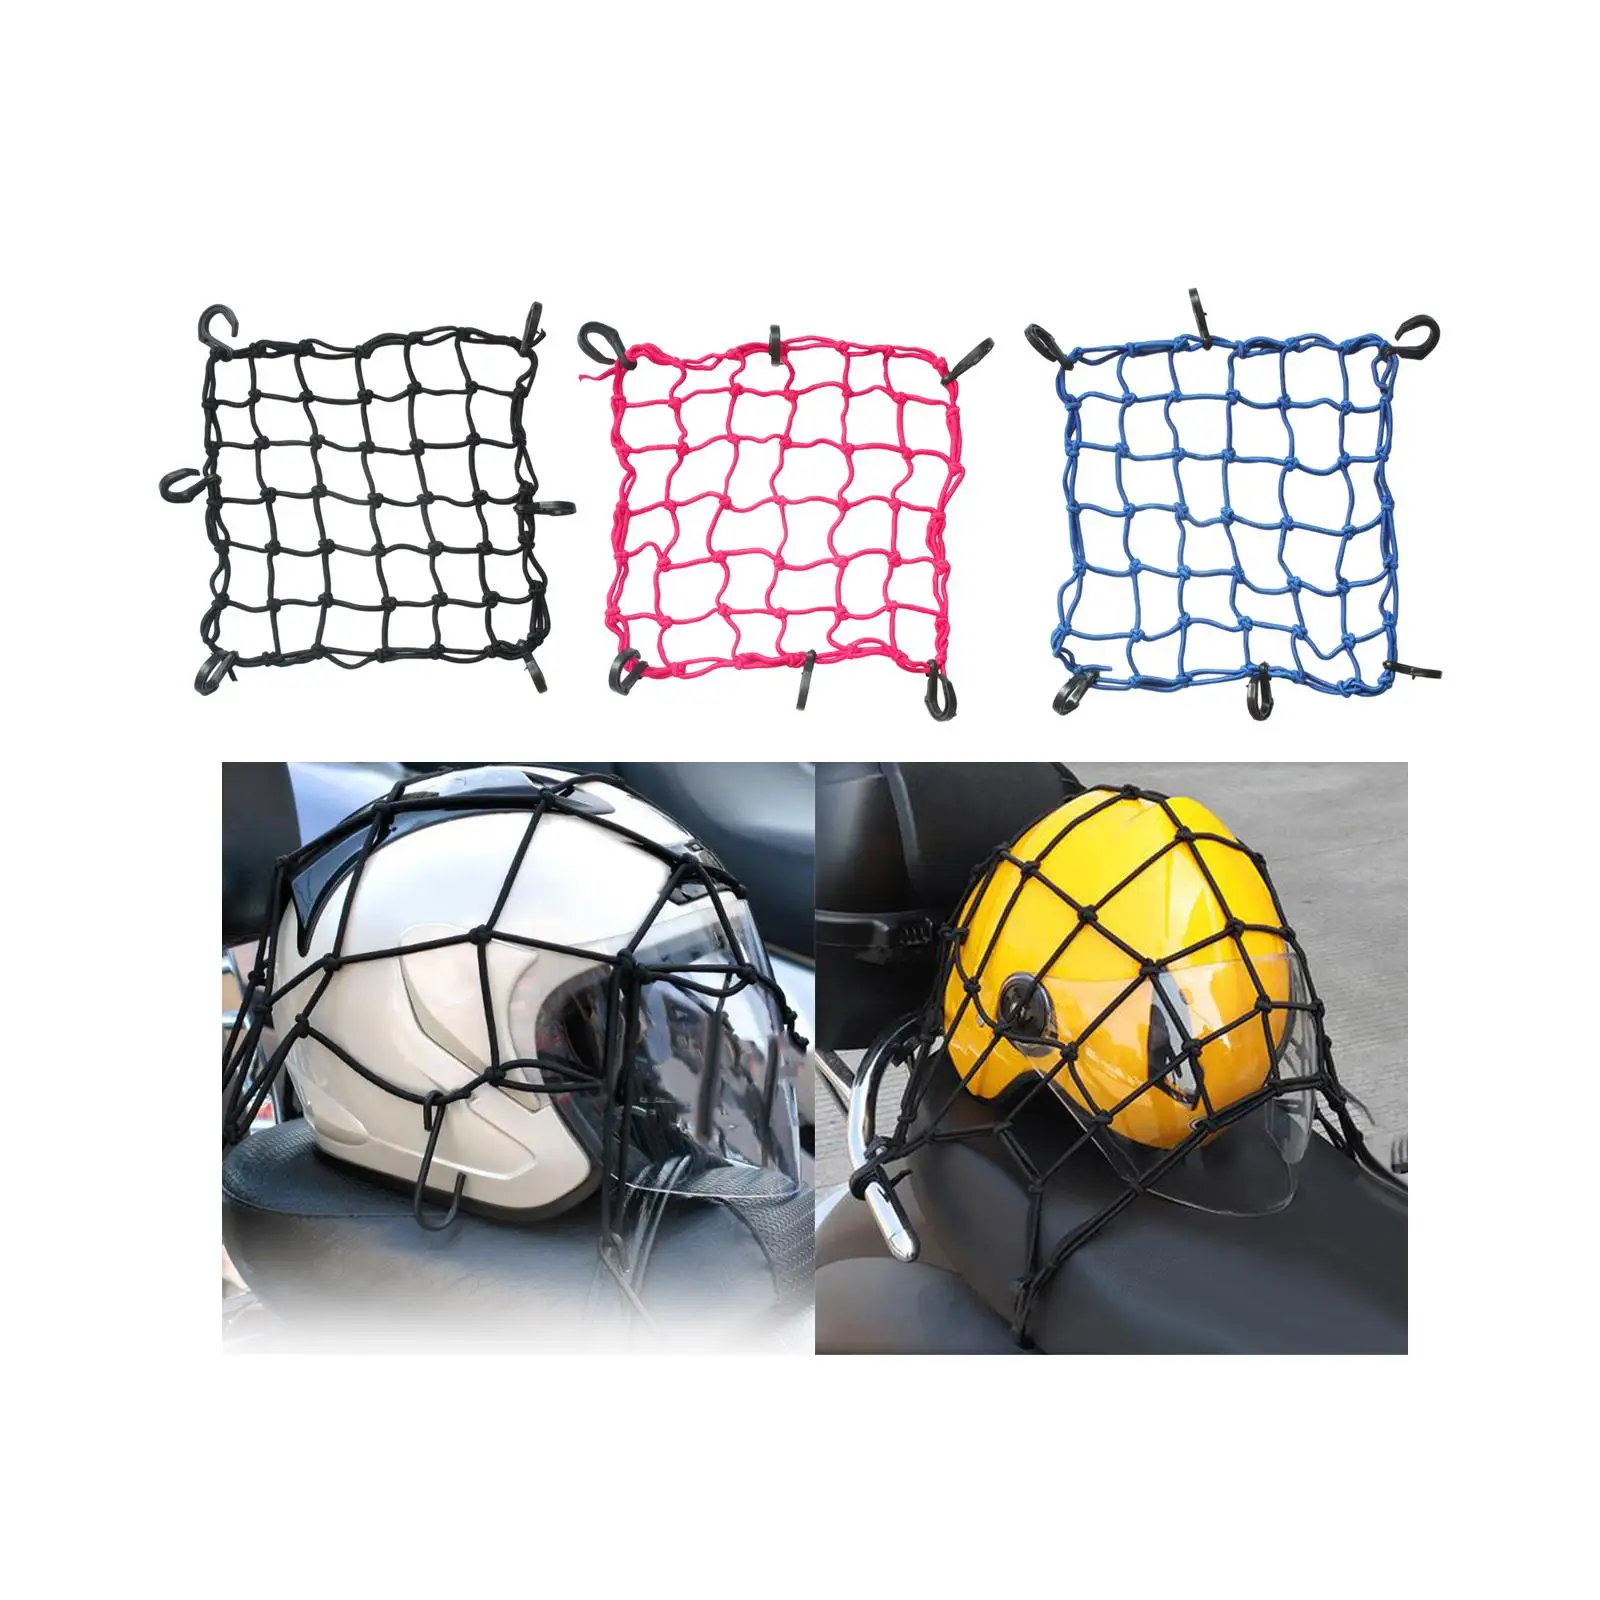 Motorcycle Top Box Cargo Net Stretchable Nets Cover 30x30cm Small Mesh